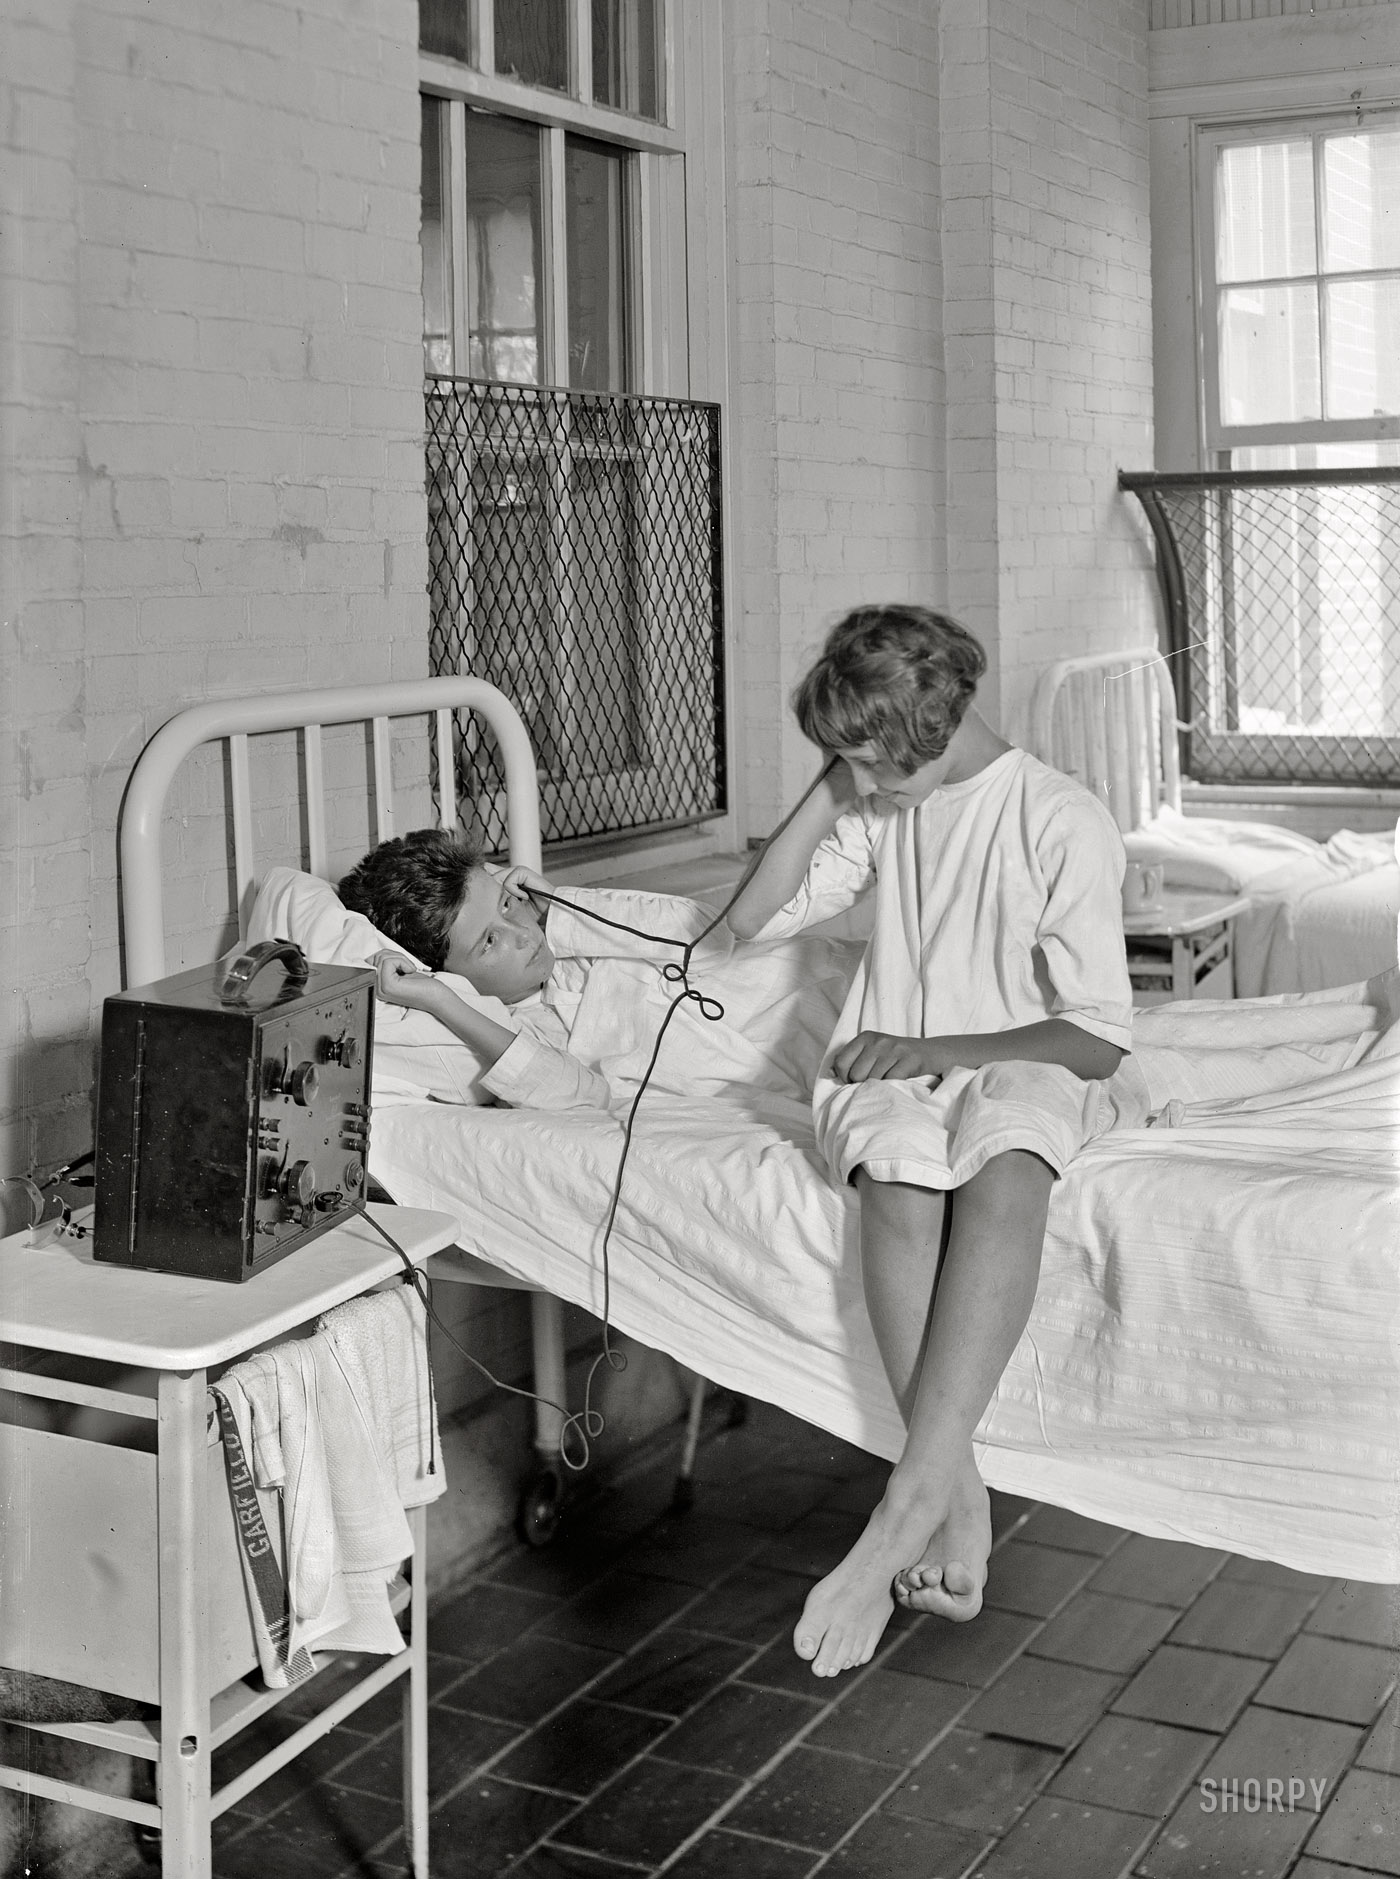 Washington, D.C., circa 1924. "Radio at Garfield Hospital." Feeling better yet? National Photo Company Collection glass negative. View full size.